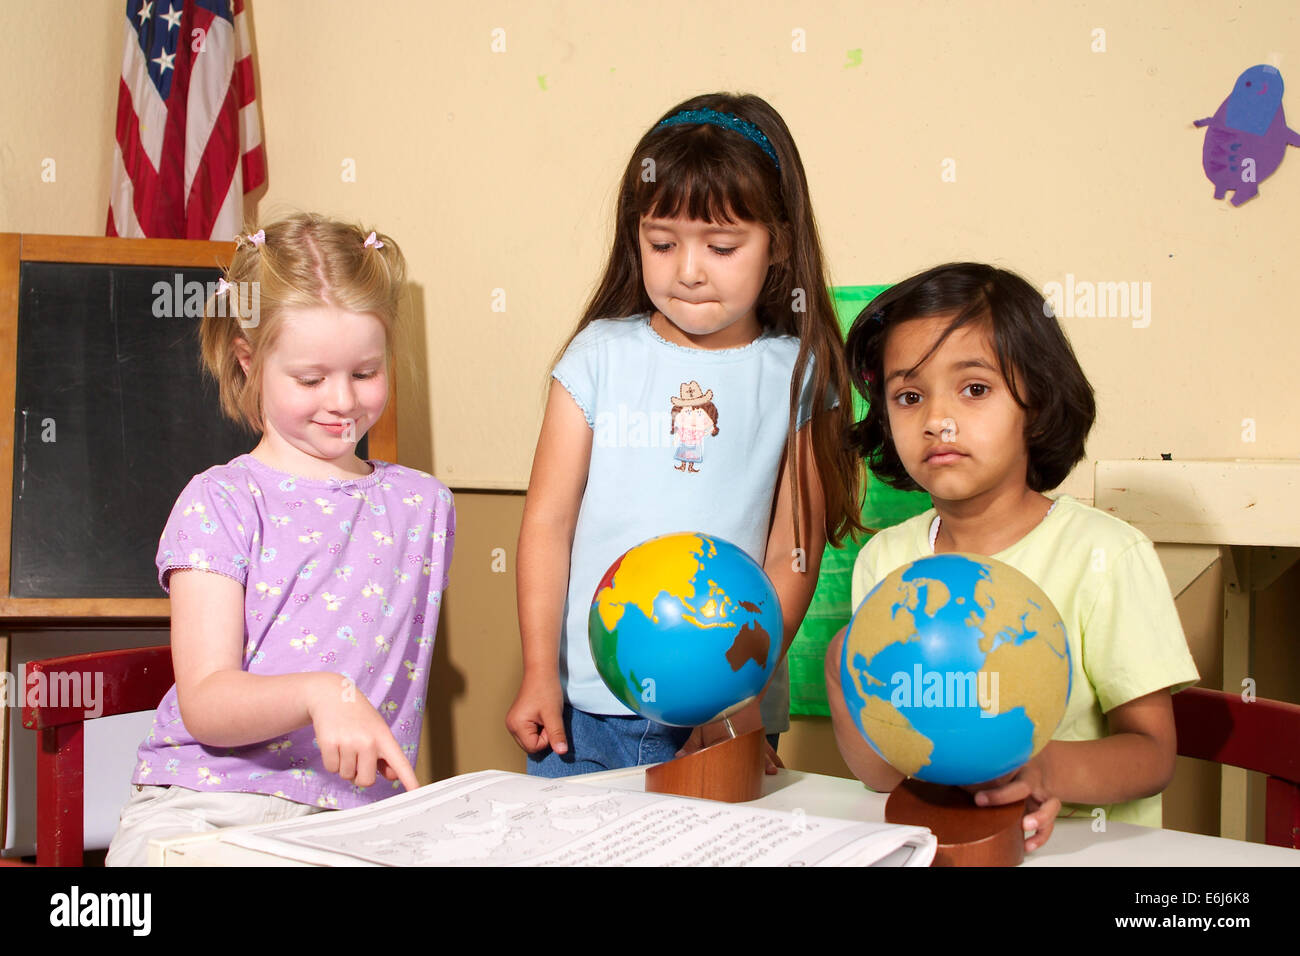 eye contact multi ethnic racial diversity racially diverse multicultural Girls work working together globe map kindergarten school young person people Stock Photo